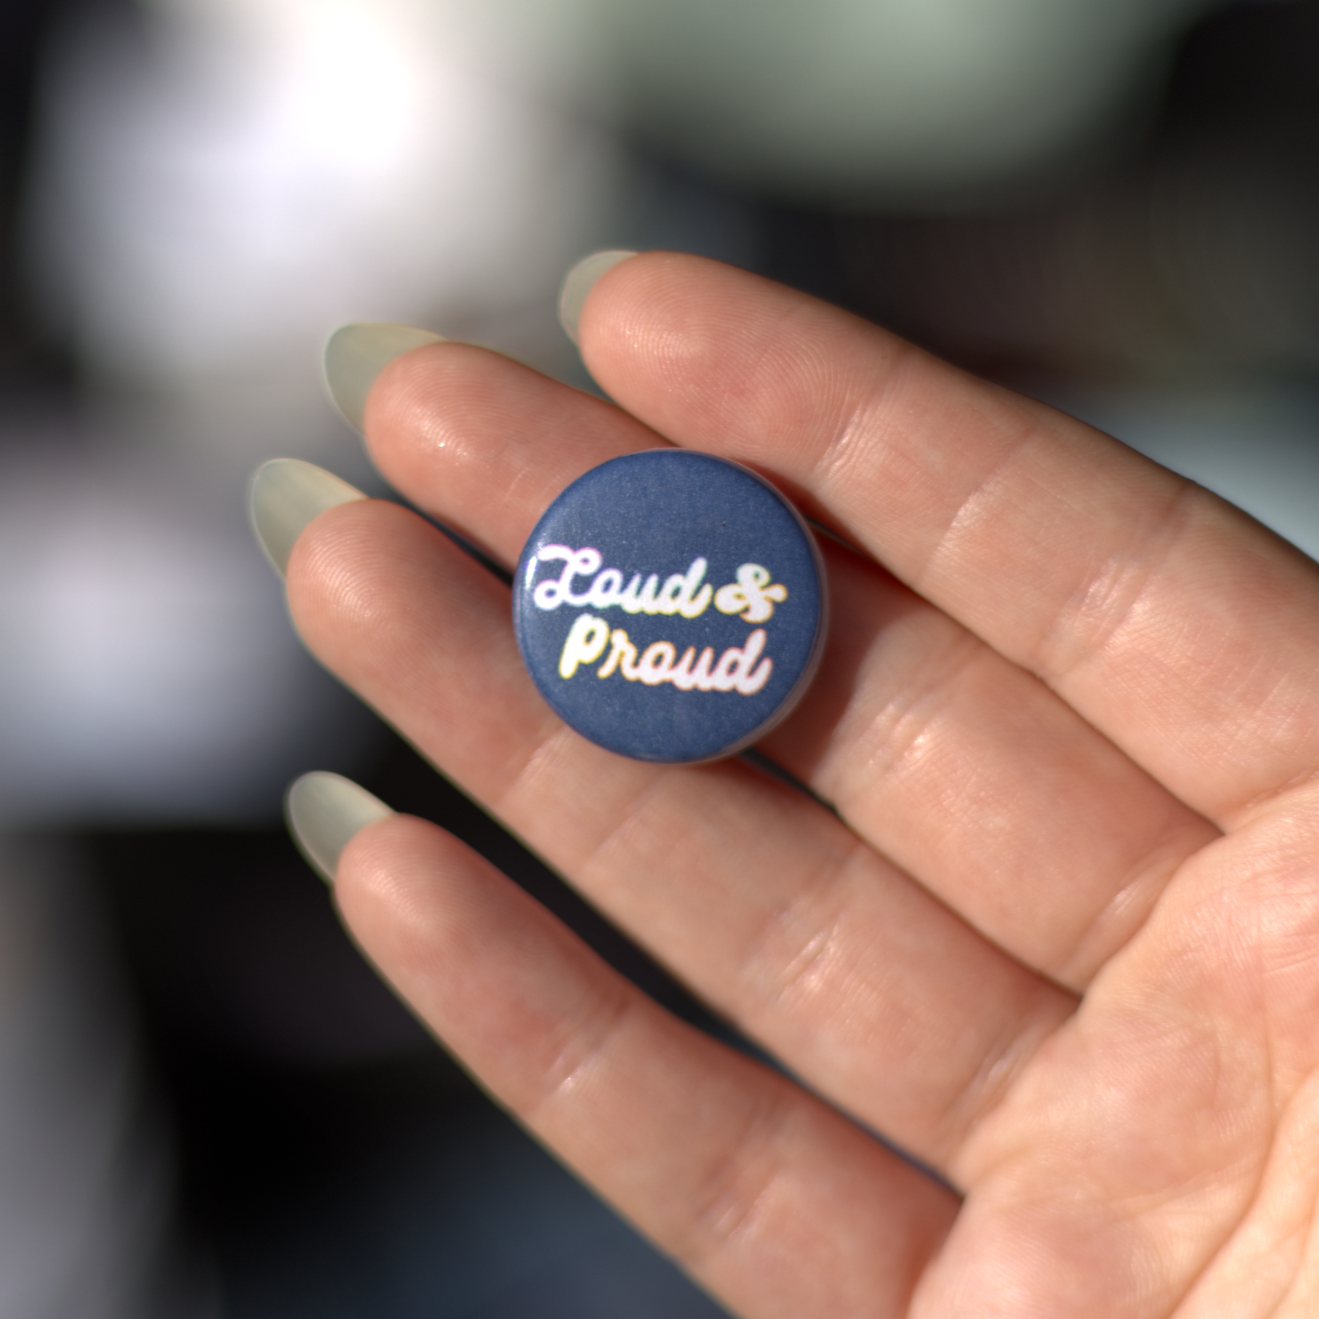 Loud & Proud is on a dark blue background, with the words Loud & Proud written in the center. The letters are in a cursive font and are outlined in a rainbow gradient.